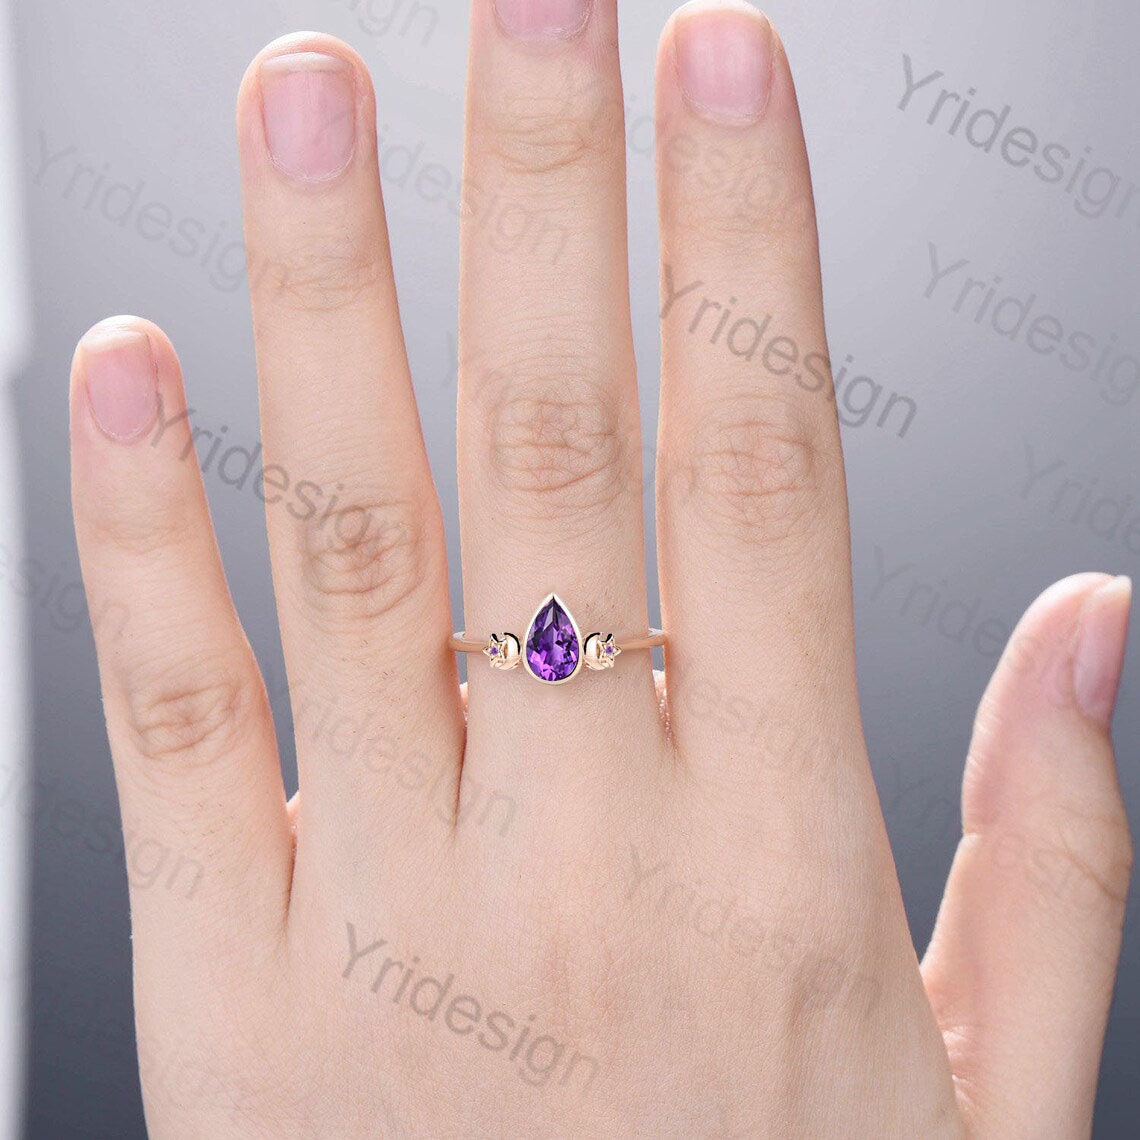 Vintage Pear Shaped Amethyst Engagement Ring Unique moon star bezel set purple crystal silver rose gold wedding ring for women birthday gift - PENFINE